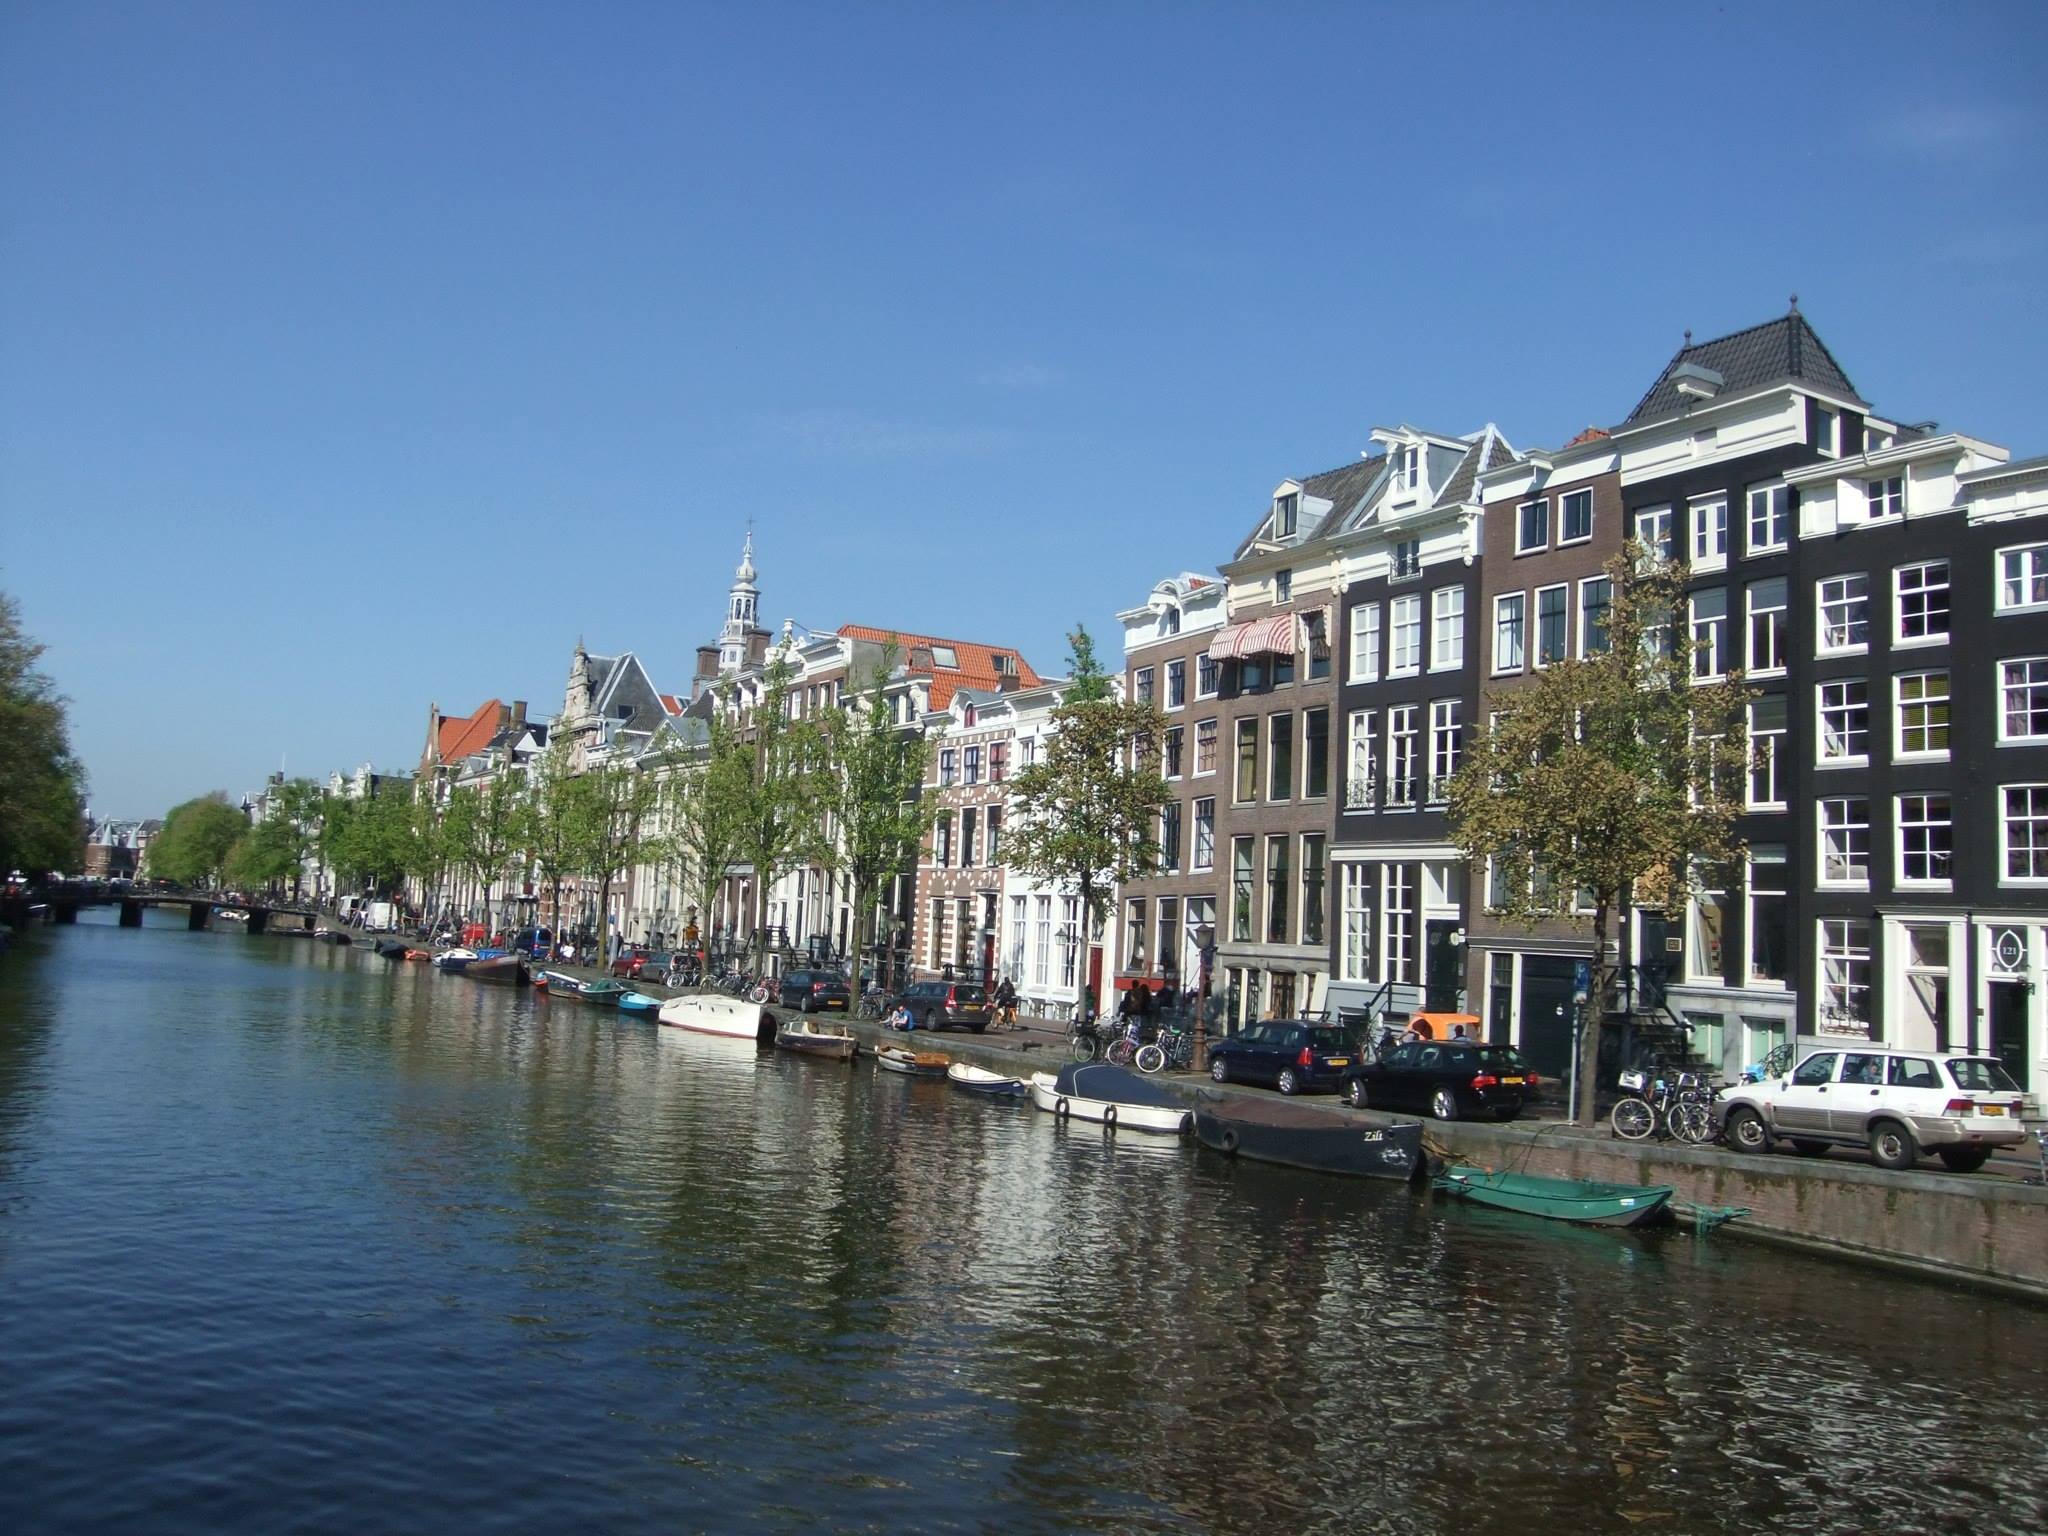 Canal houses in the sun